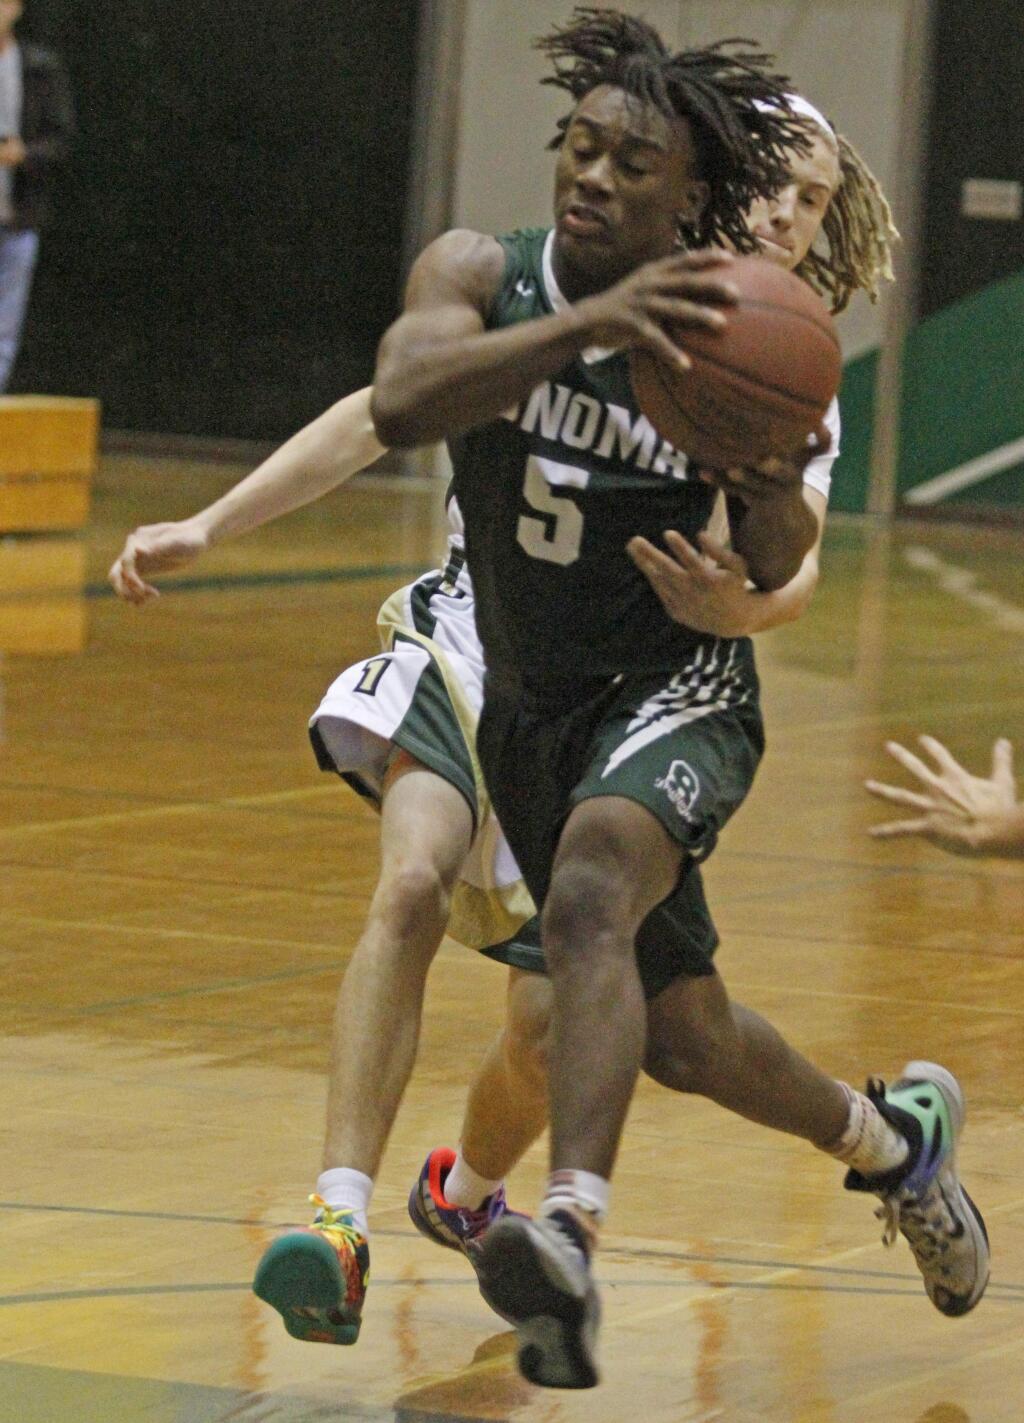 Bill Hoban/Index-TribuneSonoma's Jay taylor gets around an opponent during a recent game. Taylot and Luke Severson were named to the all-tournament team at last week's Dixon Ram Jam. The Dragons came in third in the tourney.